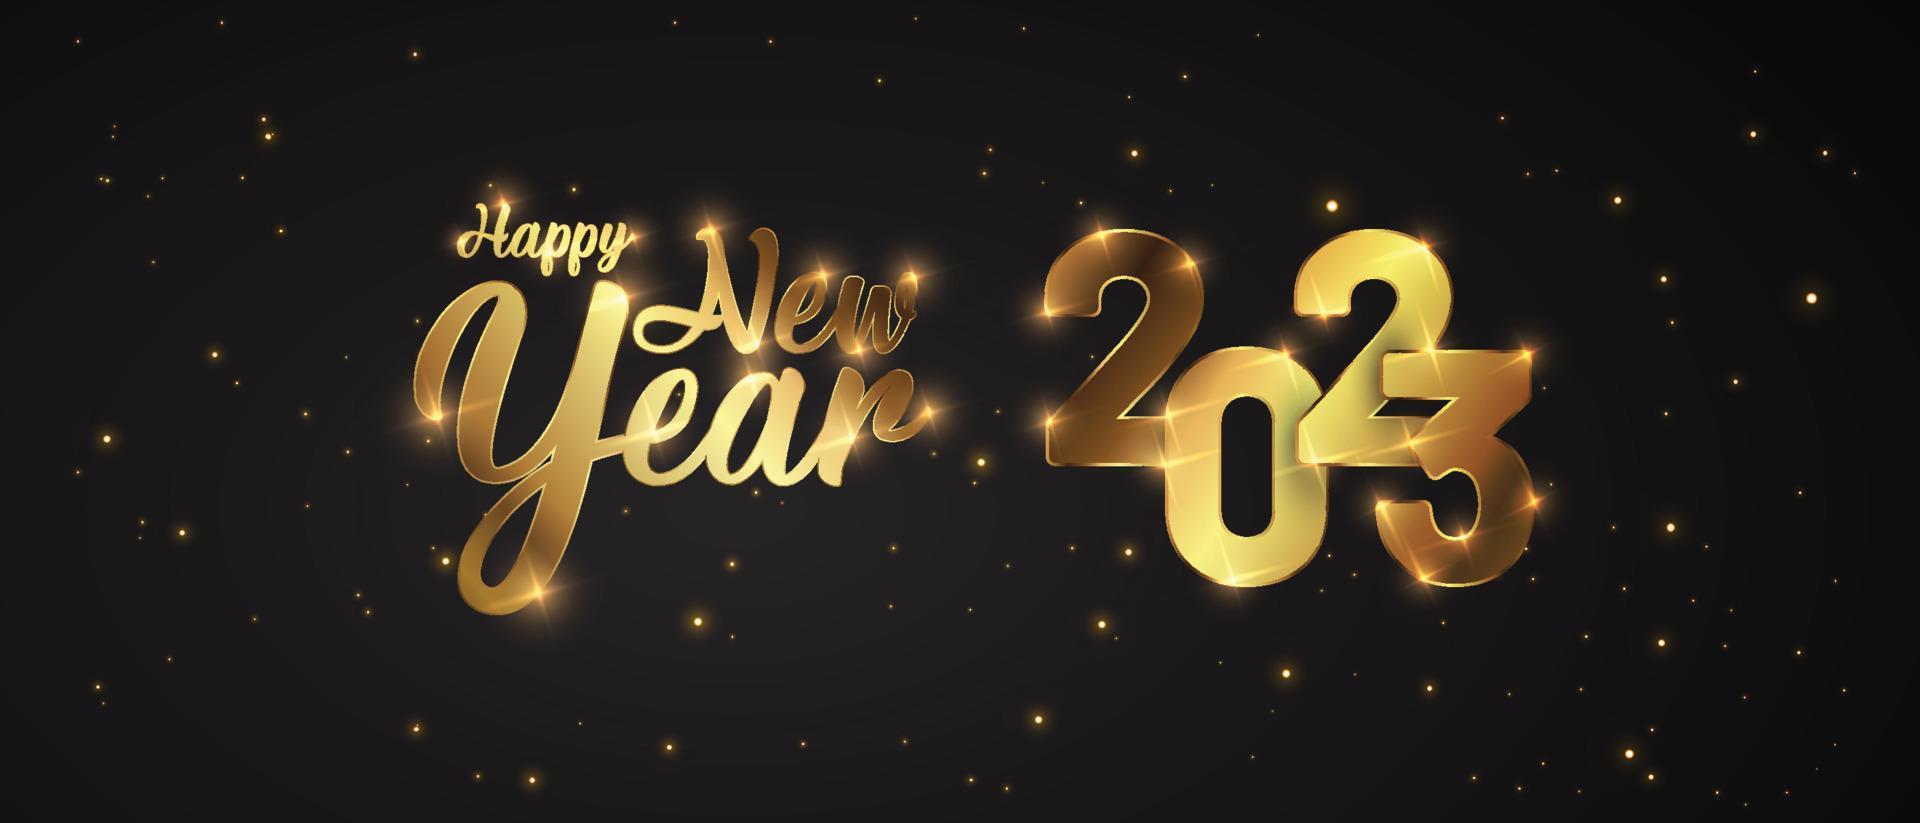 Happy New Year of glitter gold fireworks. Vector golden glittering text and 2023 numbers with sparkle shine for holiday greeting card.